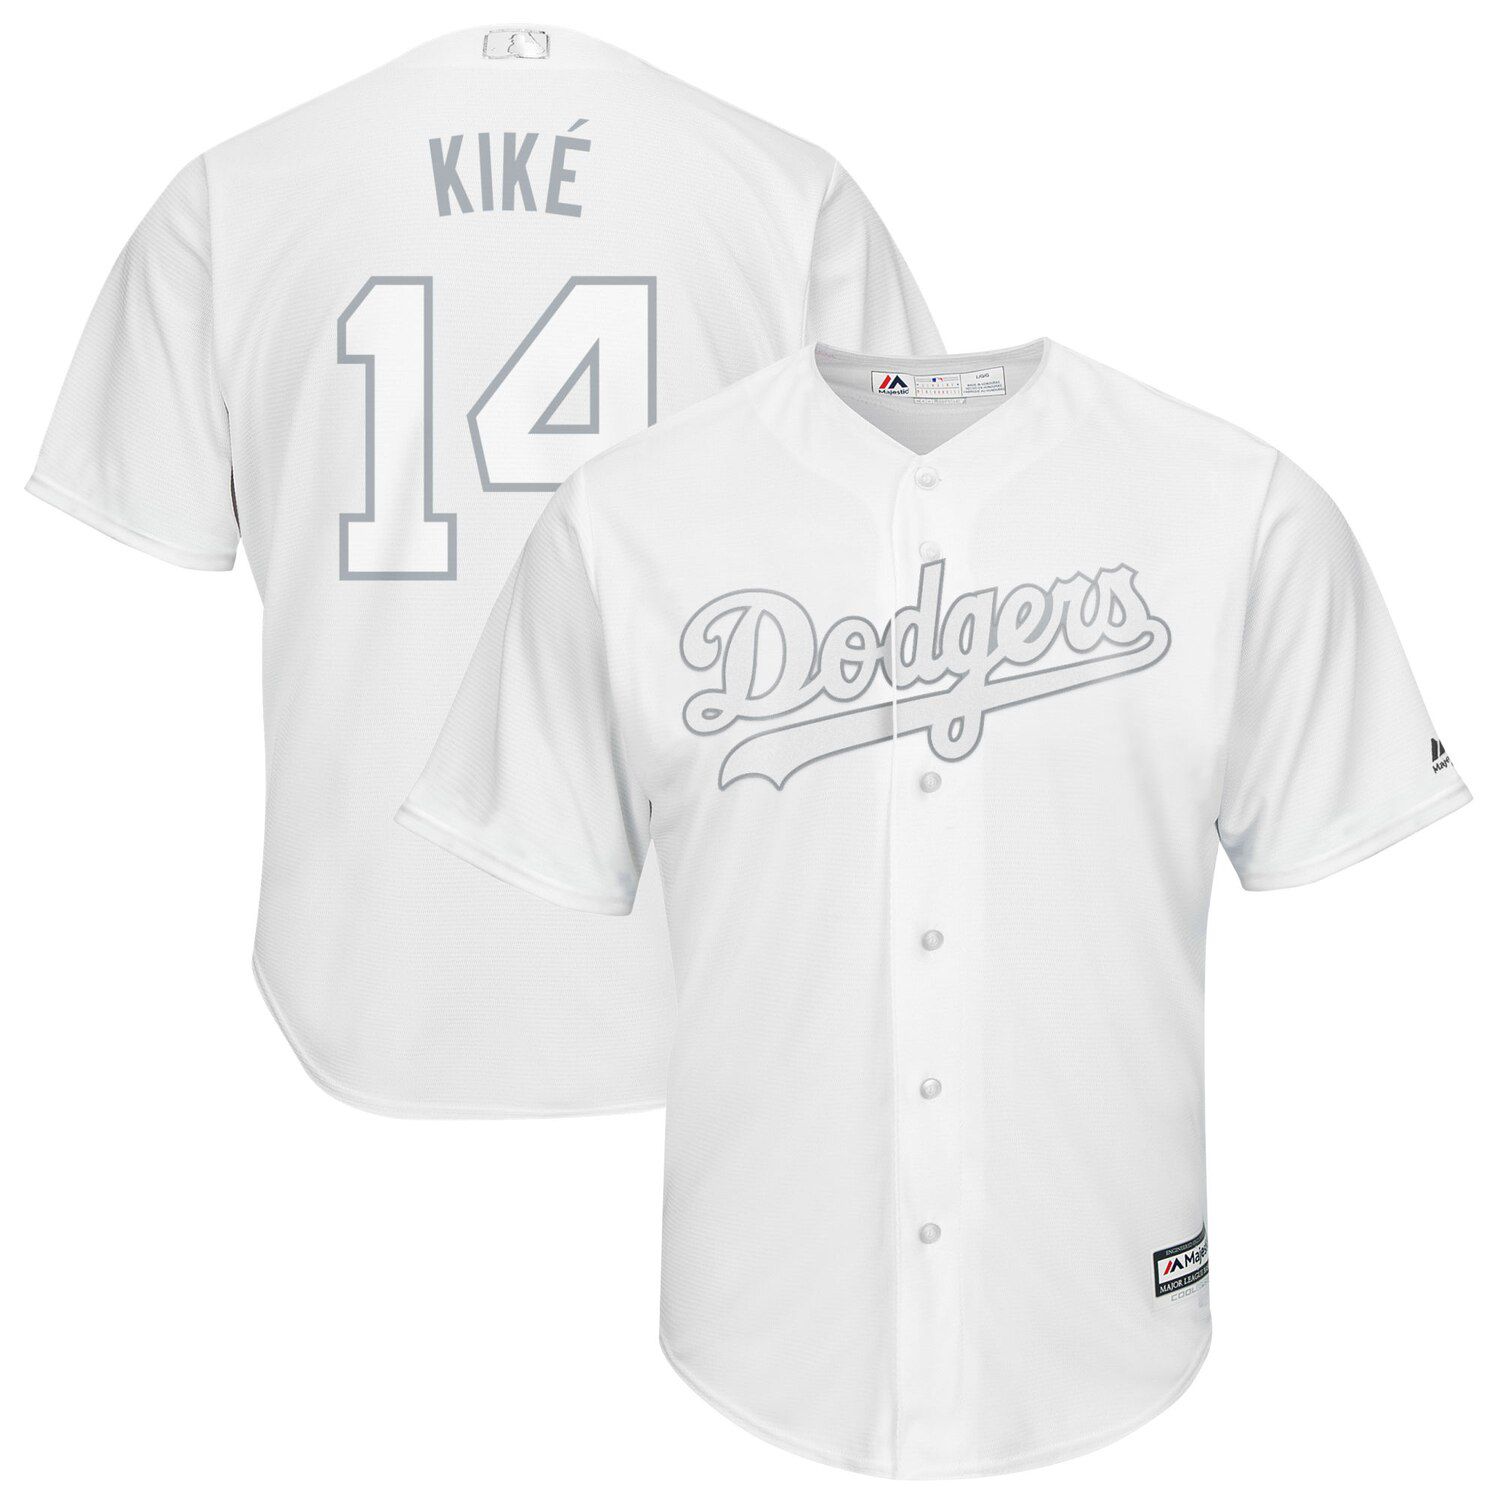 dodgers jersey players weekend